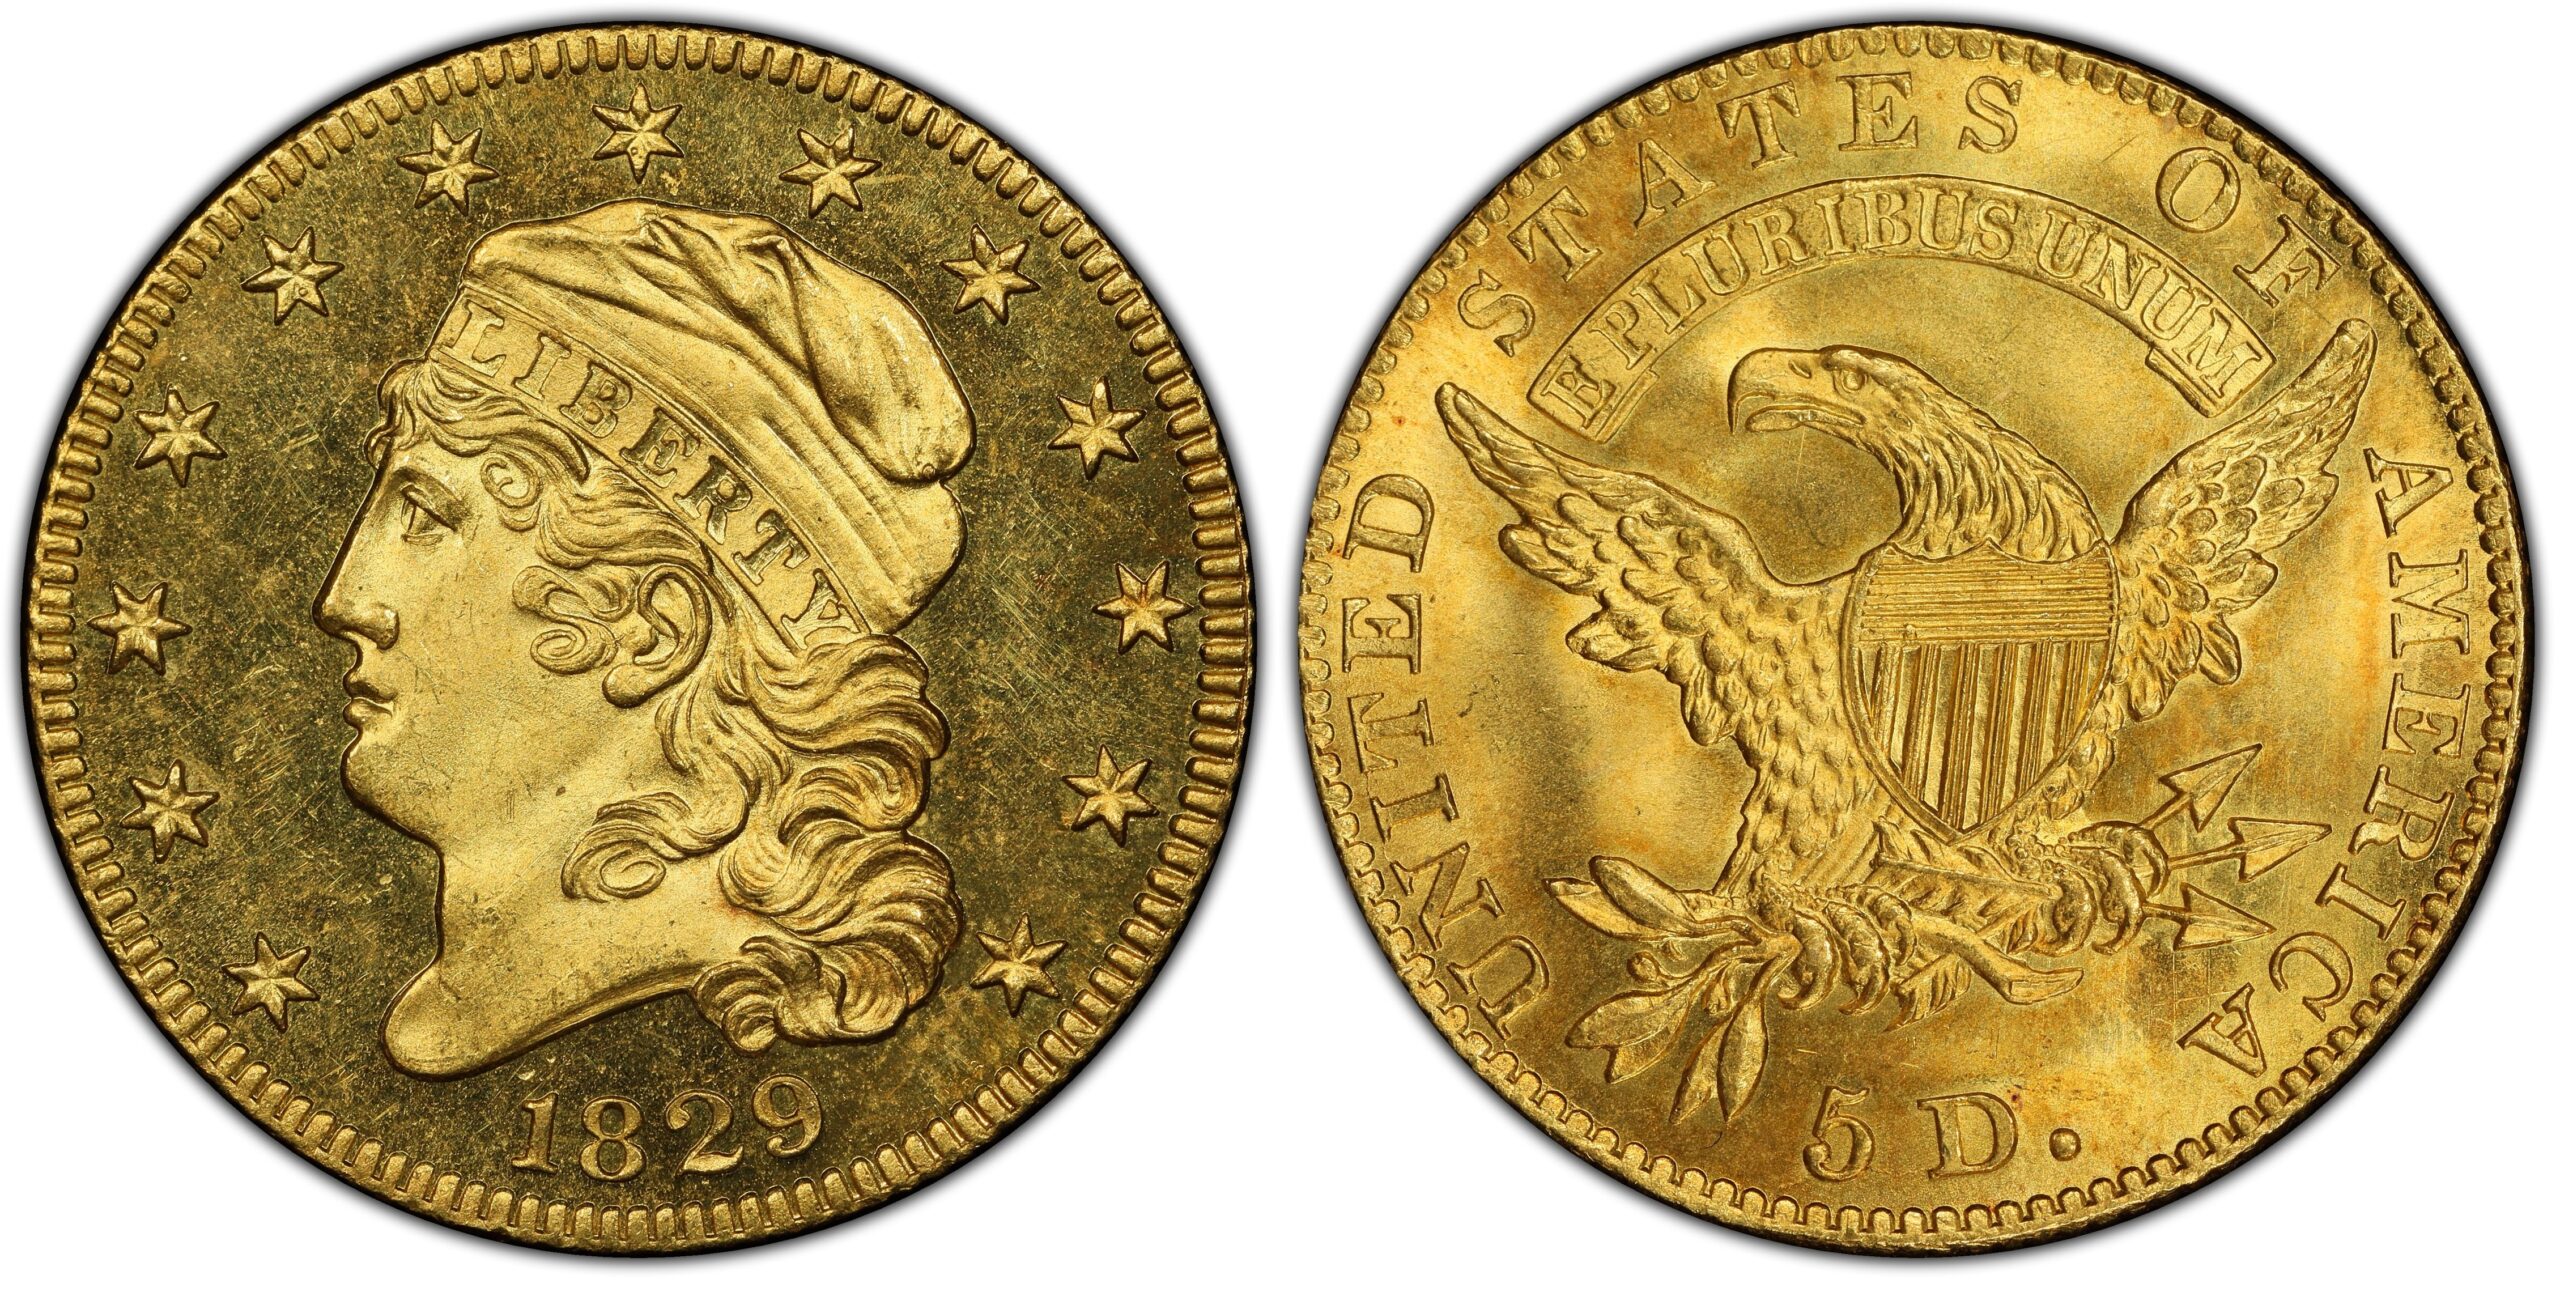 You are currently viewing 1829 Capped Head $5 Large Size (Proof) Sells For $2.8M